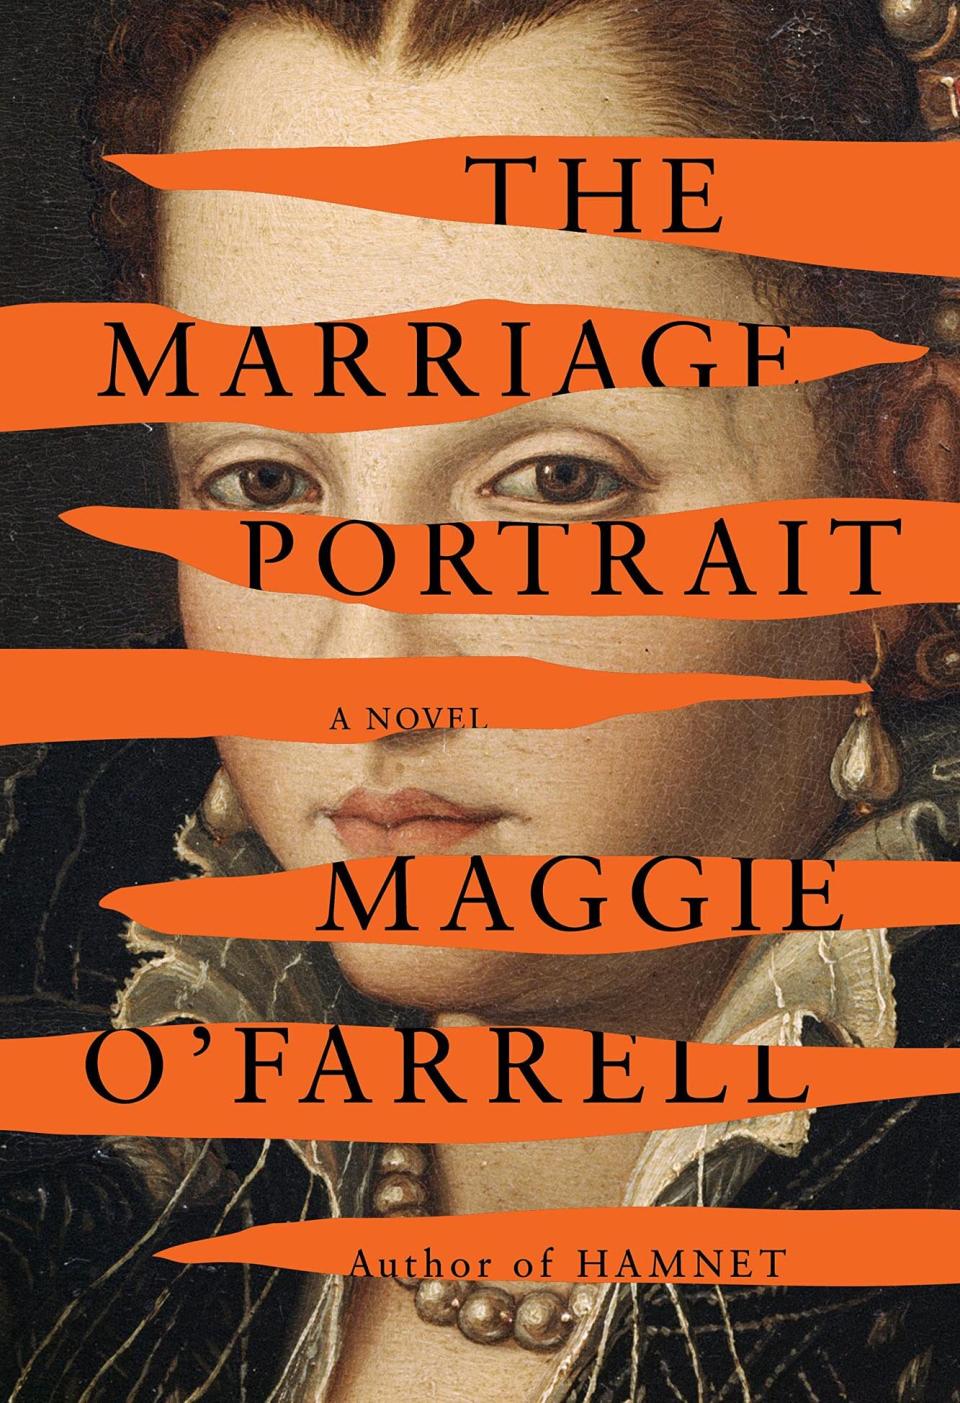 The Marriage Portrait, Maggie O’Farrell Publisher ‏ : ‎ Knopf